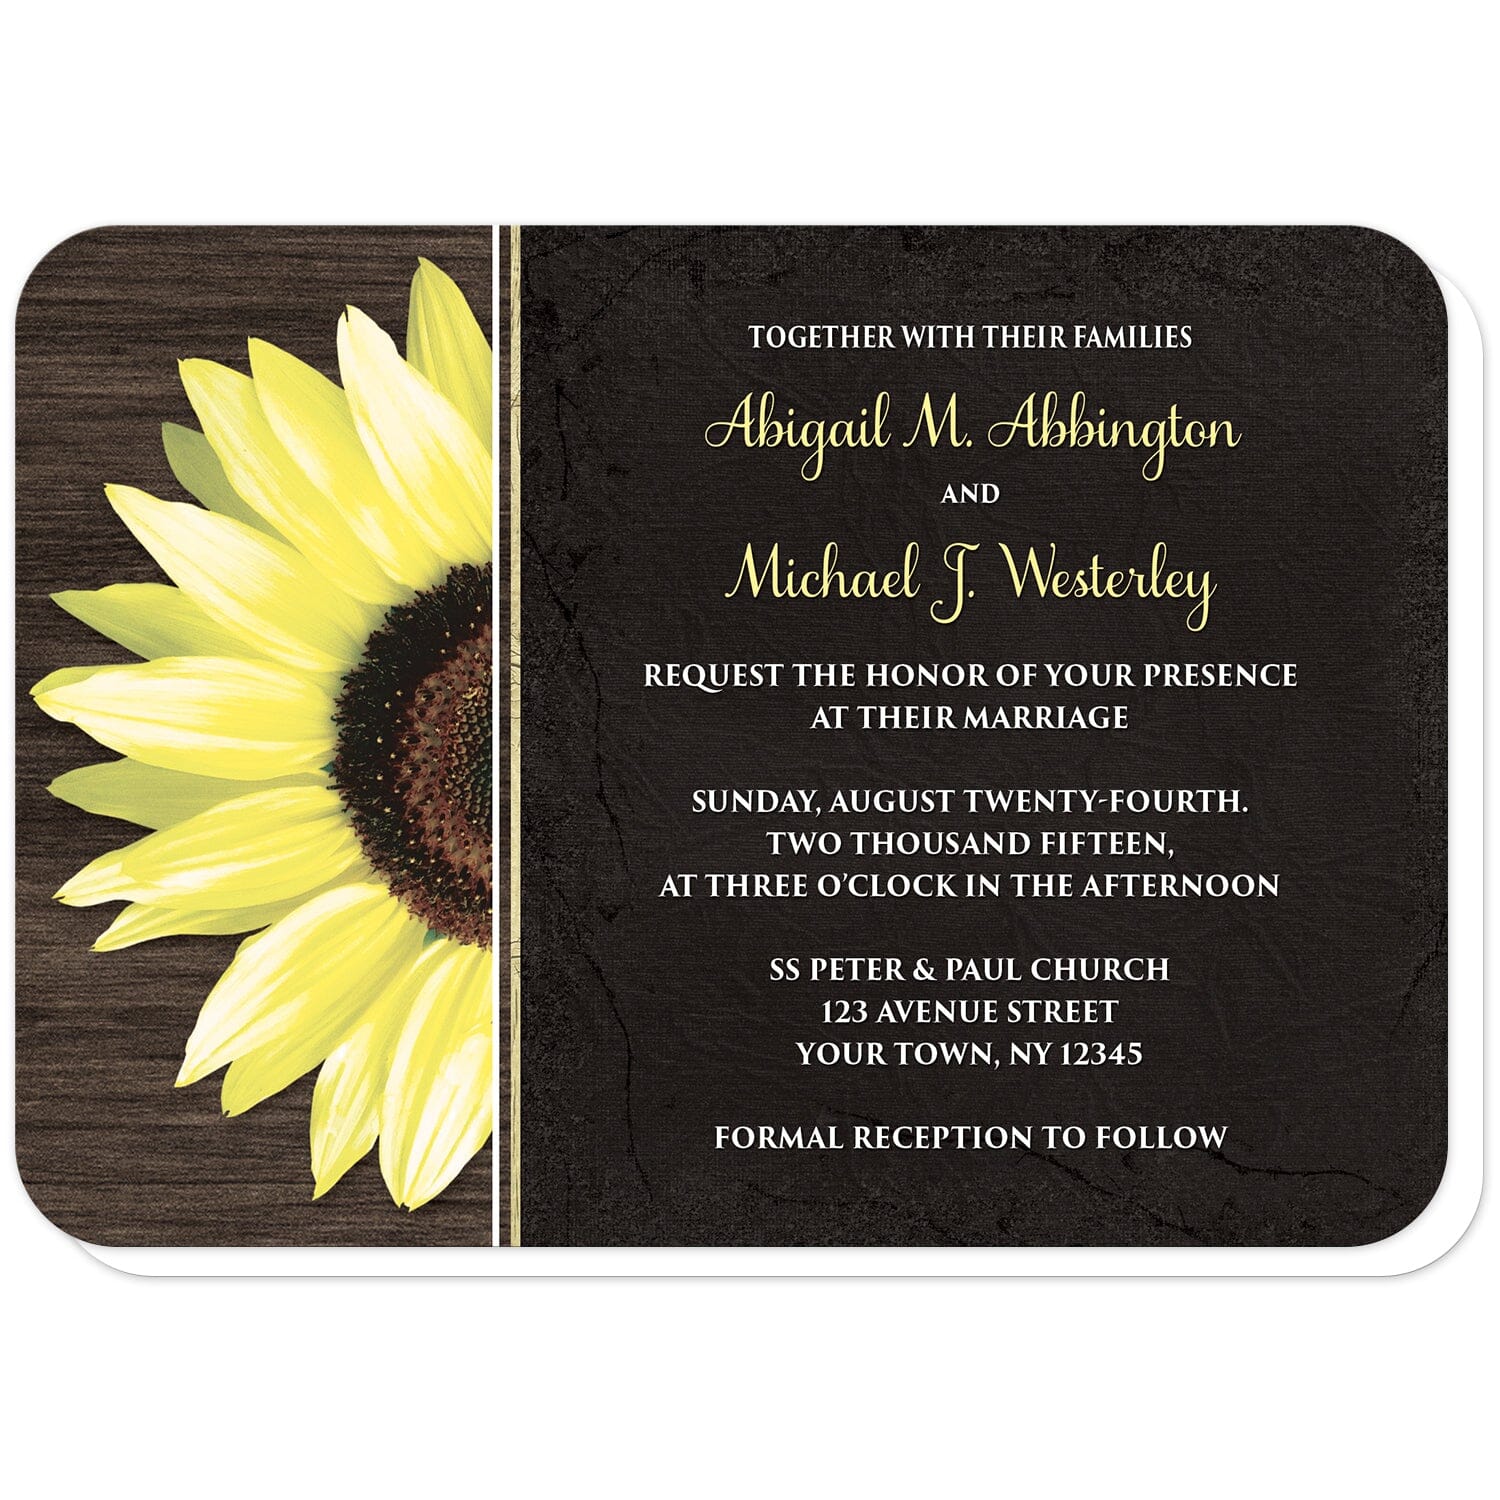 Rustic Sunflower with Black Wedding Invitations (with rounded corners) at Artistically Invited. Country-inspired rustic sunflower with black wedding invitations featuring a vibrant bright yellow sunflower over a textured dark brown wood design along the left side. Your personalized marriage celebration details are custom printed in yellow and white over a tattered black cloth illustration to the right of the sunflower.